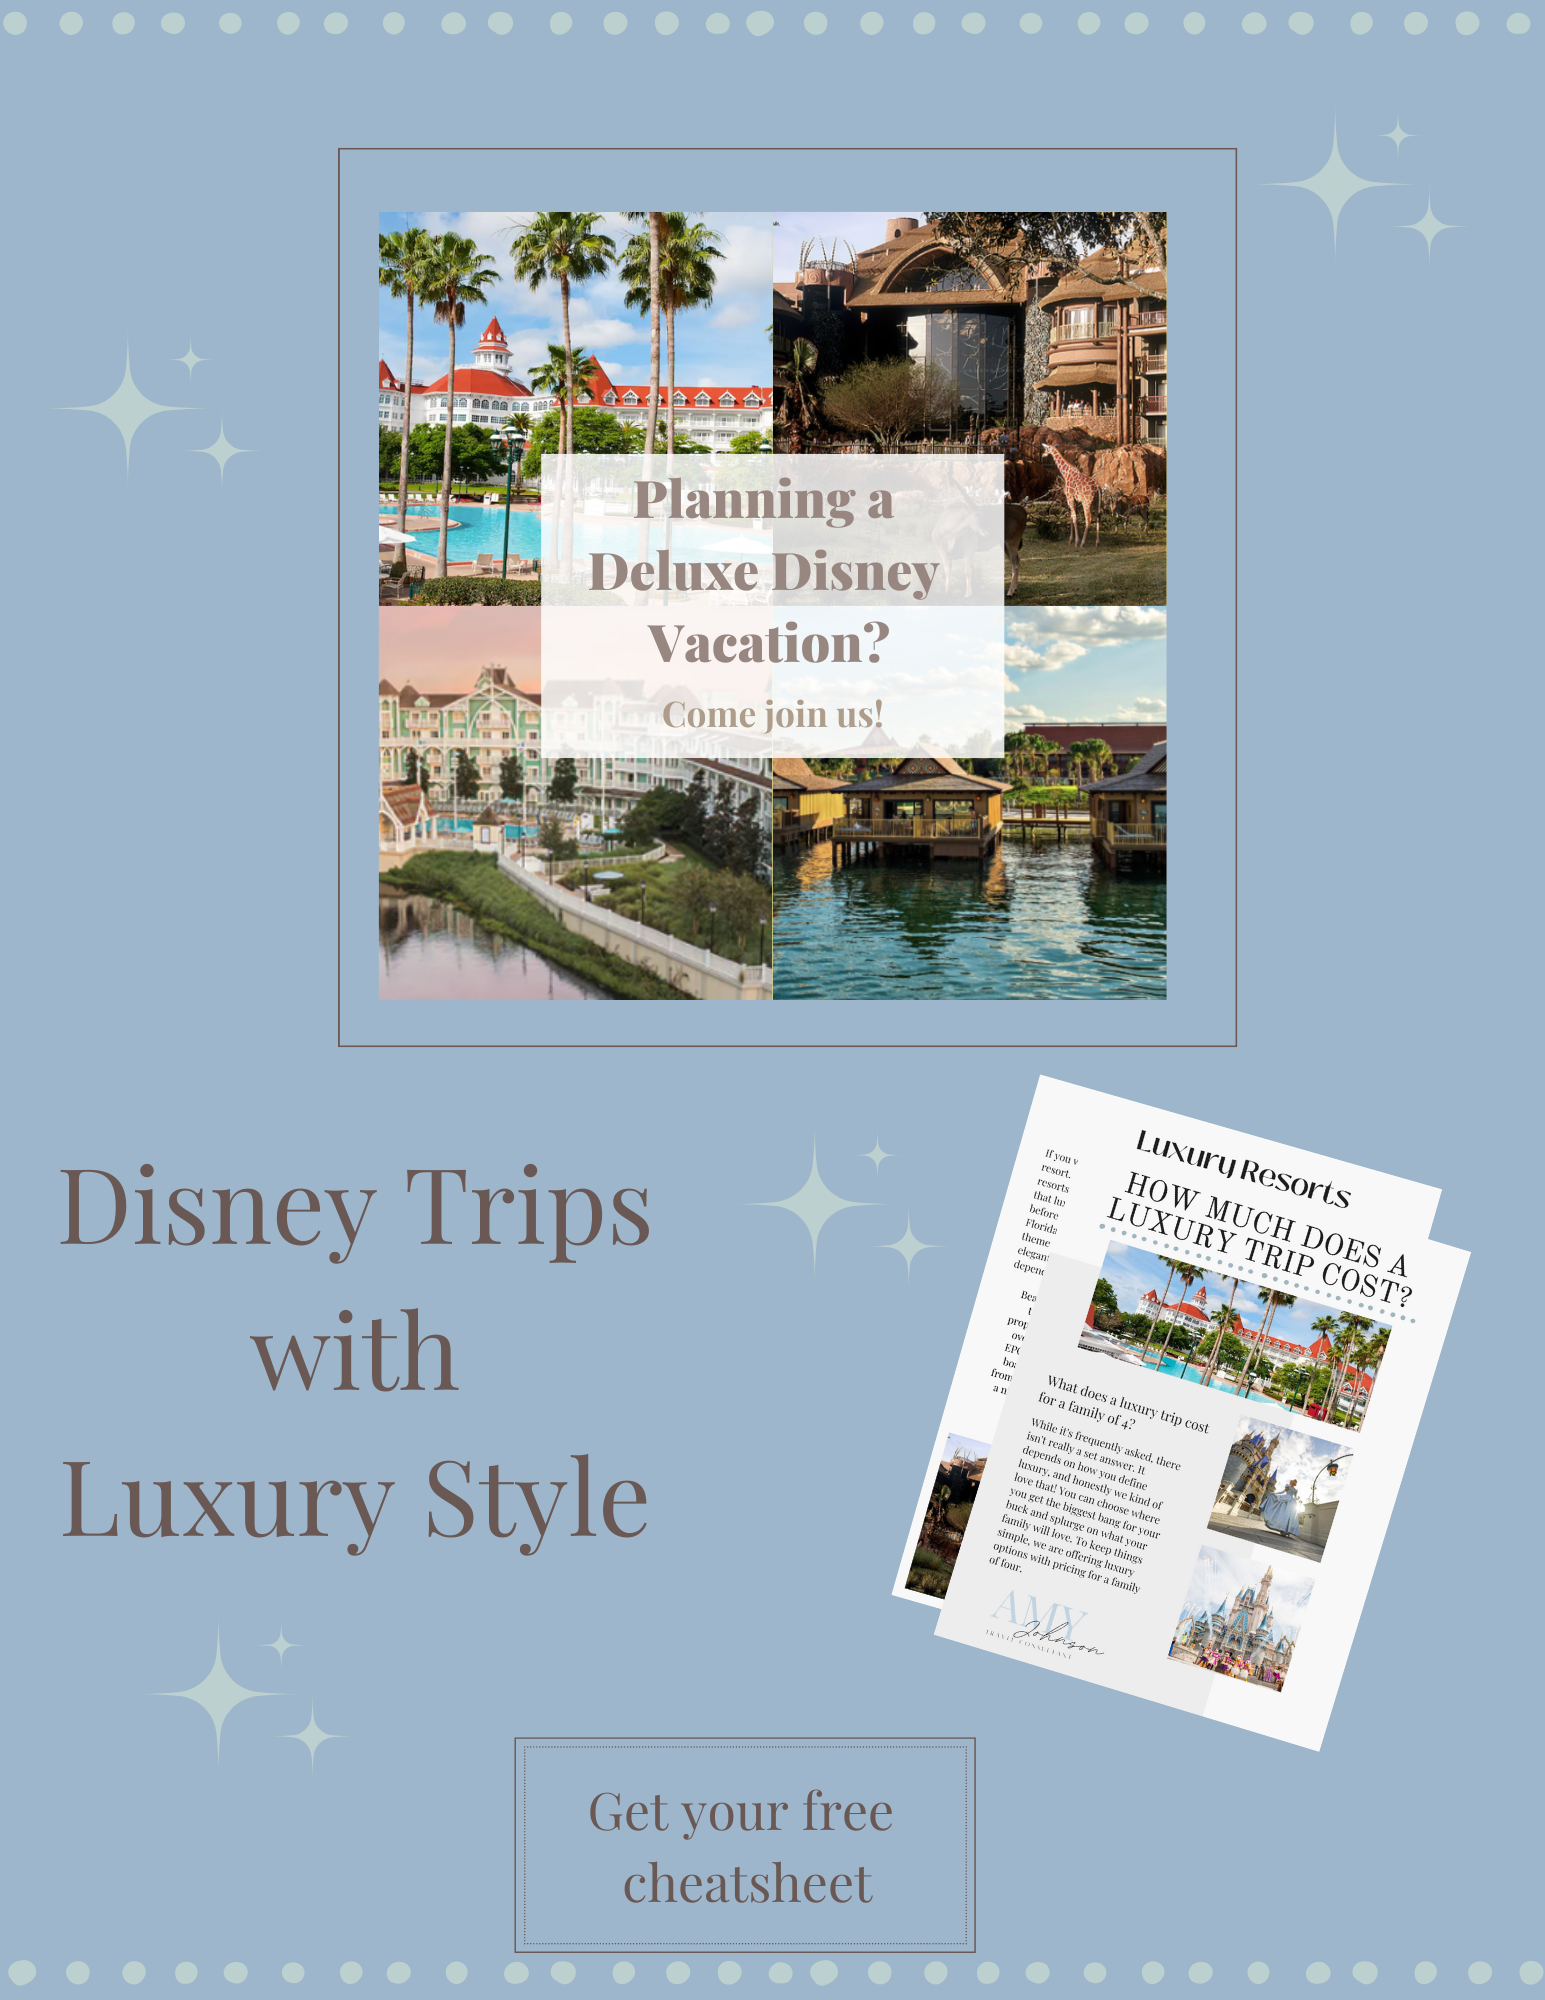 Planning a Deluxe Disney Vacation (1)